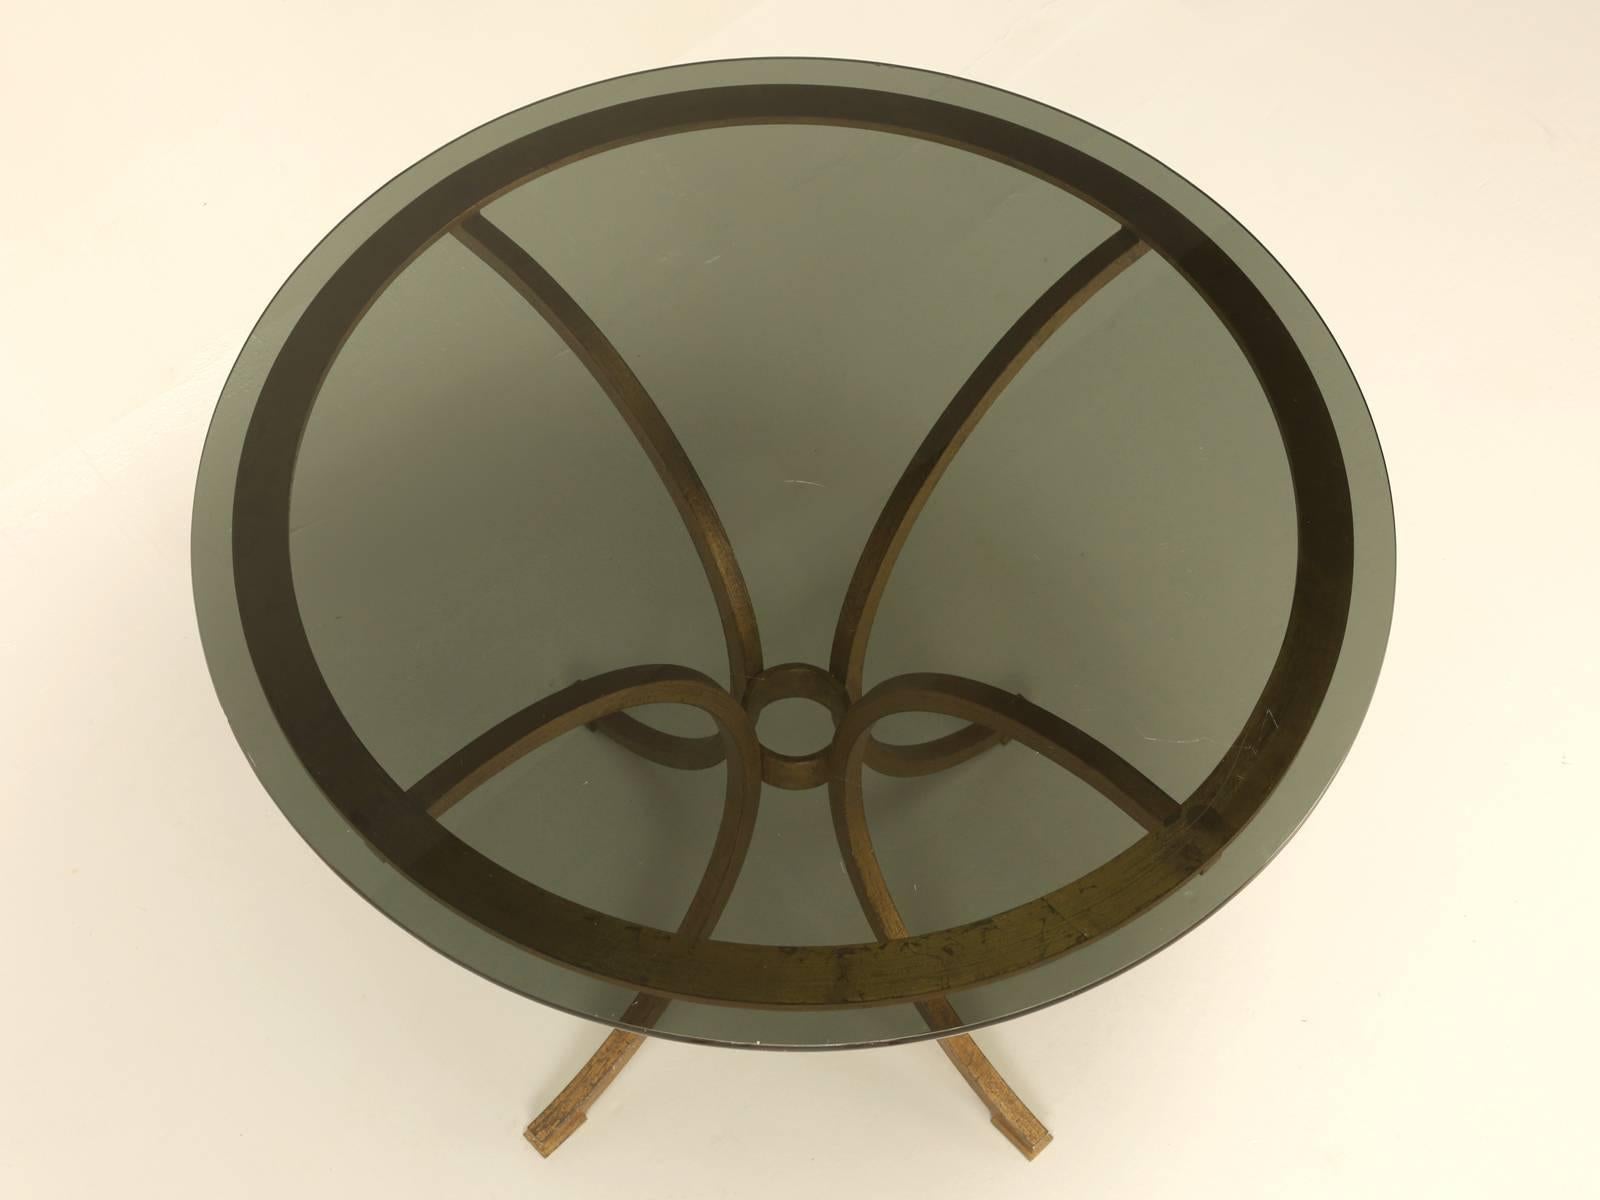 French mid-century modern, gilded forged iron table which can be used in a multitude of locations. Such as an end table next to a sofa, a center hall table in your entry foyer, to a small kitchen table. The smoky glass top is not original to the